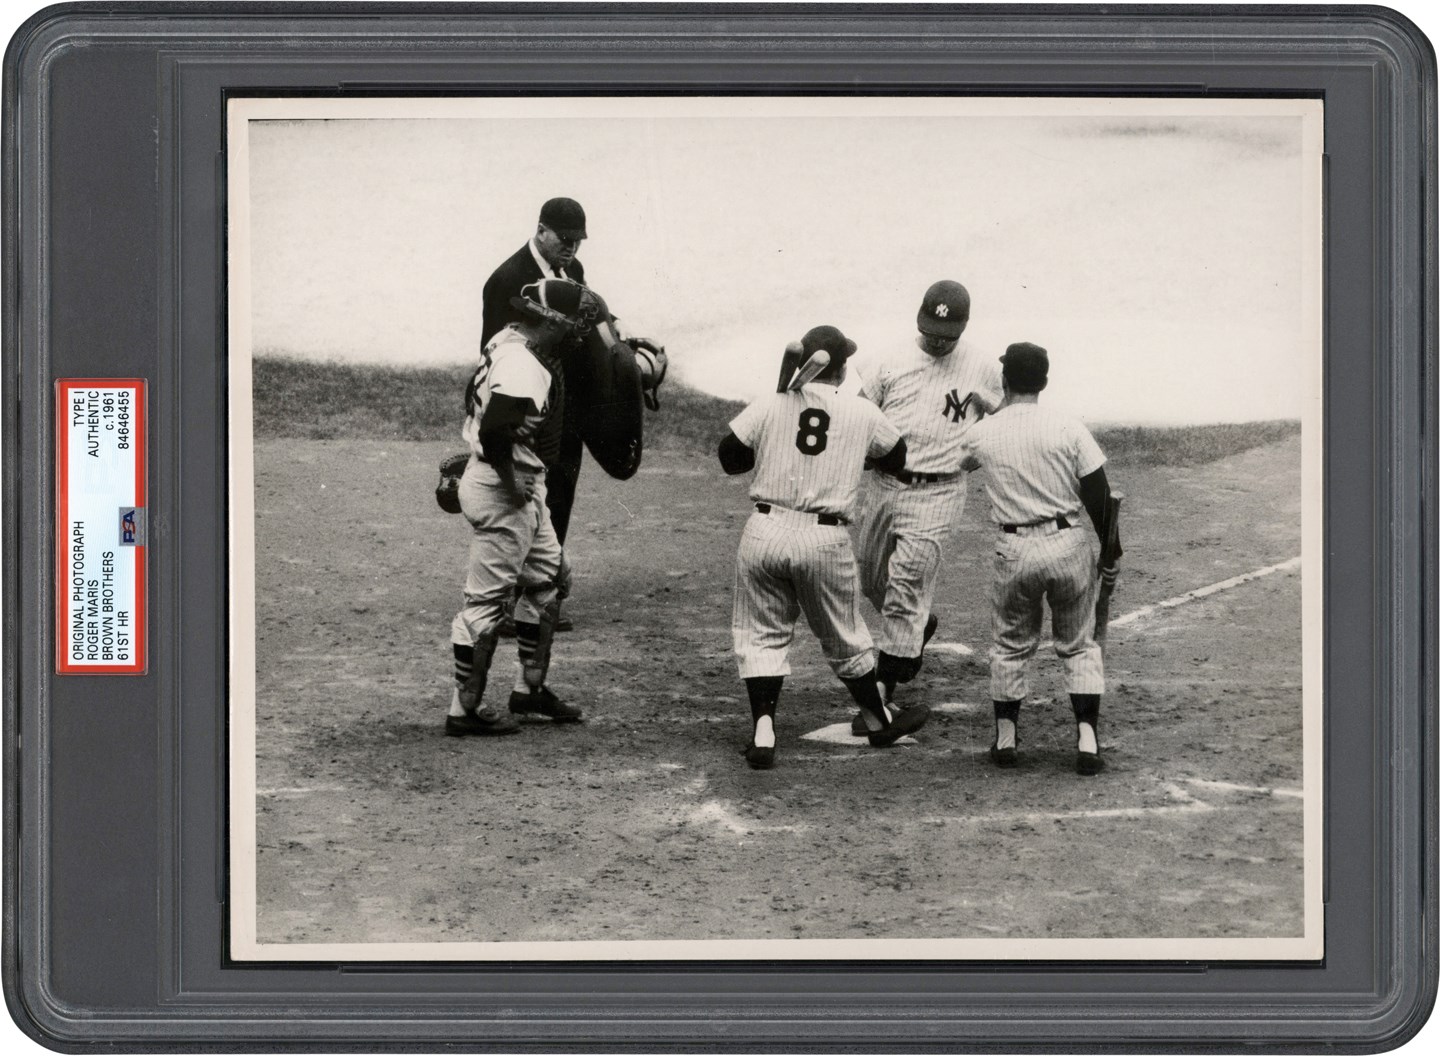 Vintage Sports Photographs - 1961 Roger Maris 61st Home Run Photo Brown Brothers Photograph (PSA Type I)